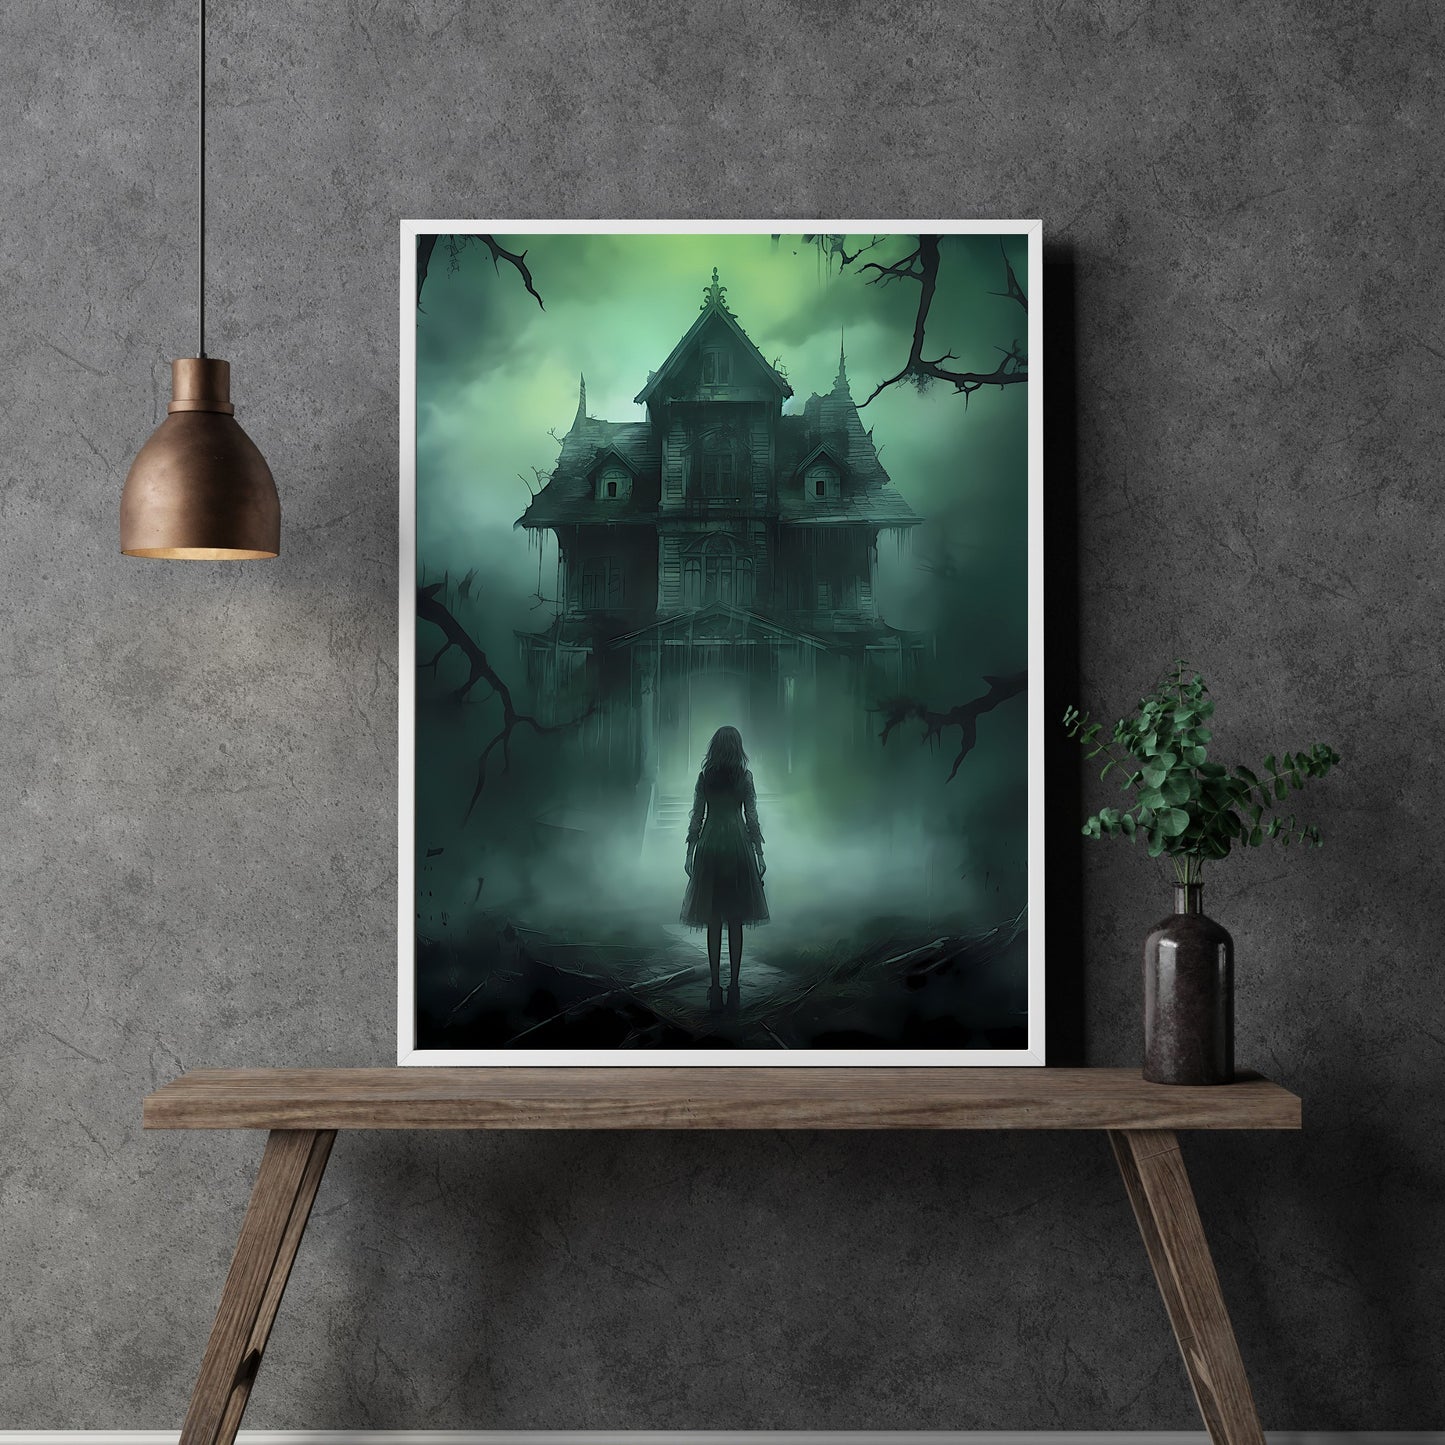 Ghost Girl at Abandoned Mansion Paper Poster Prints Dark Spooky Decor Fantasy Poster Dark Academia Dark Cottagecore Gothic Retro Ghost Wall Art Wicca